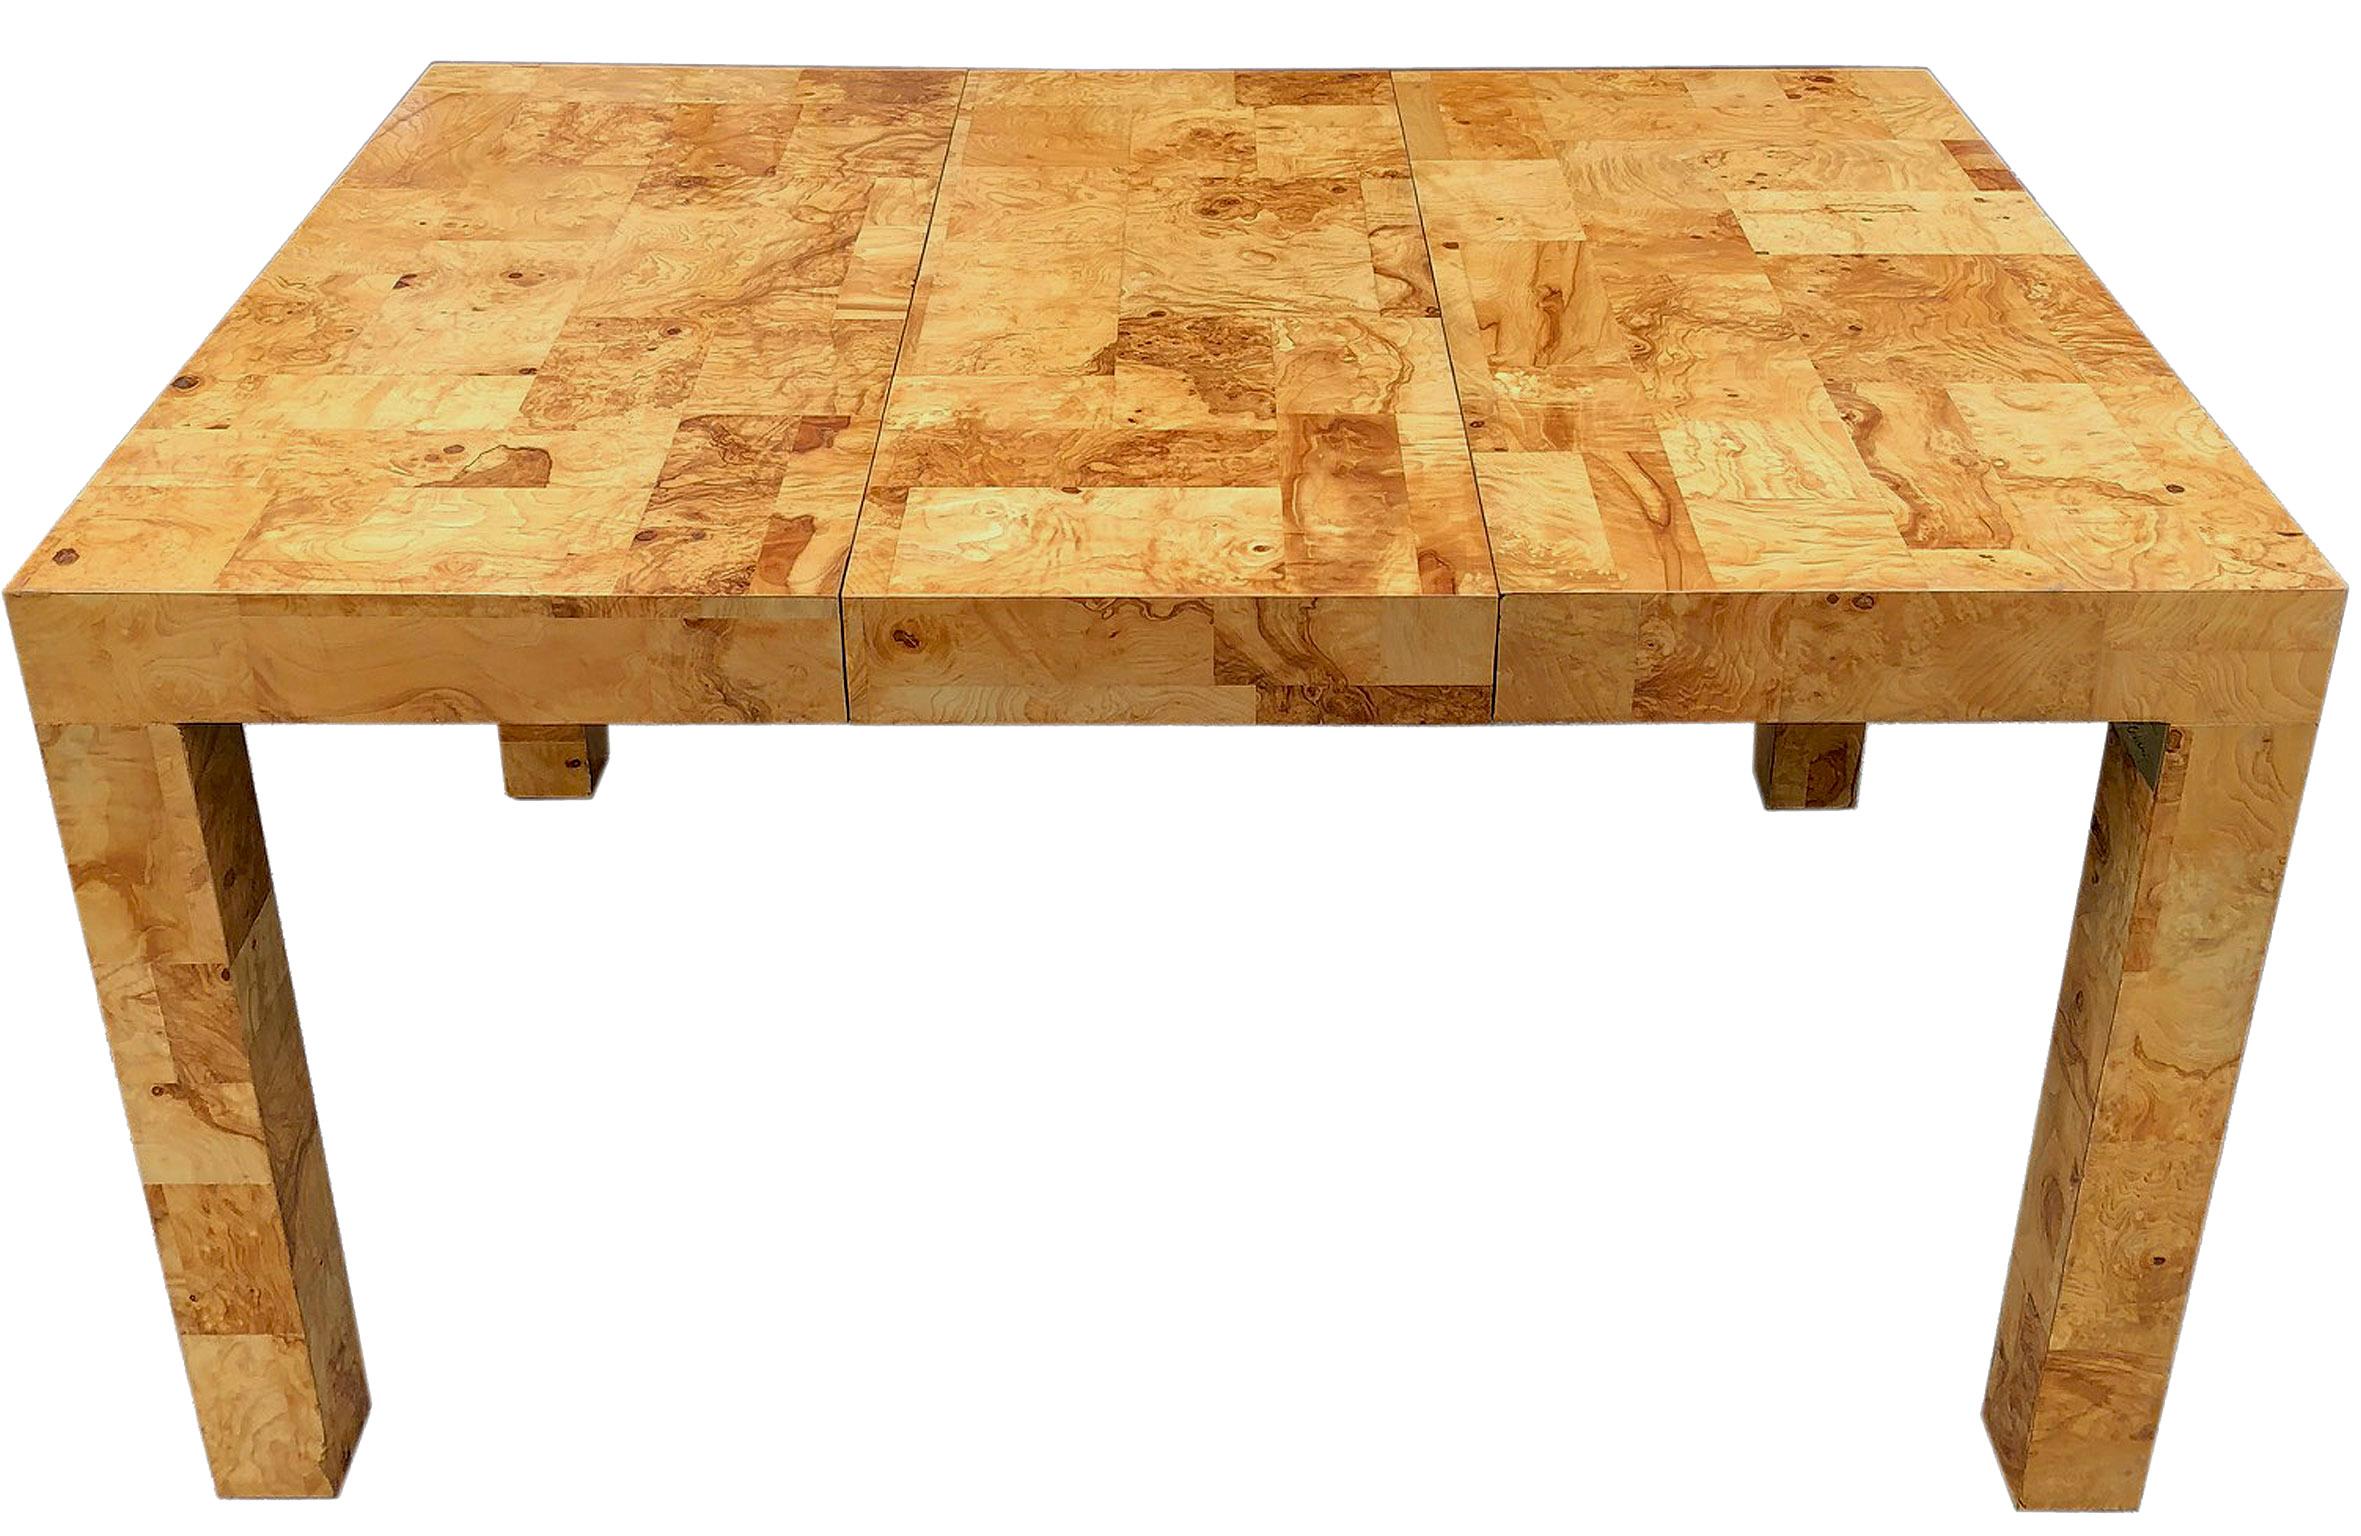 Top of the line handcrafted burlwood table. Other designers produced burl Parsons tables such as Milo Baughman and Leon Rosen however, Paul Evans added his signature patchwork design that really stands out above the rest.

A nice size that could